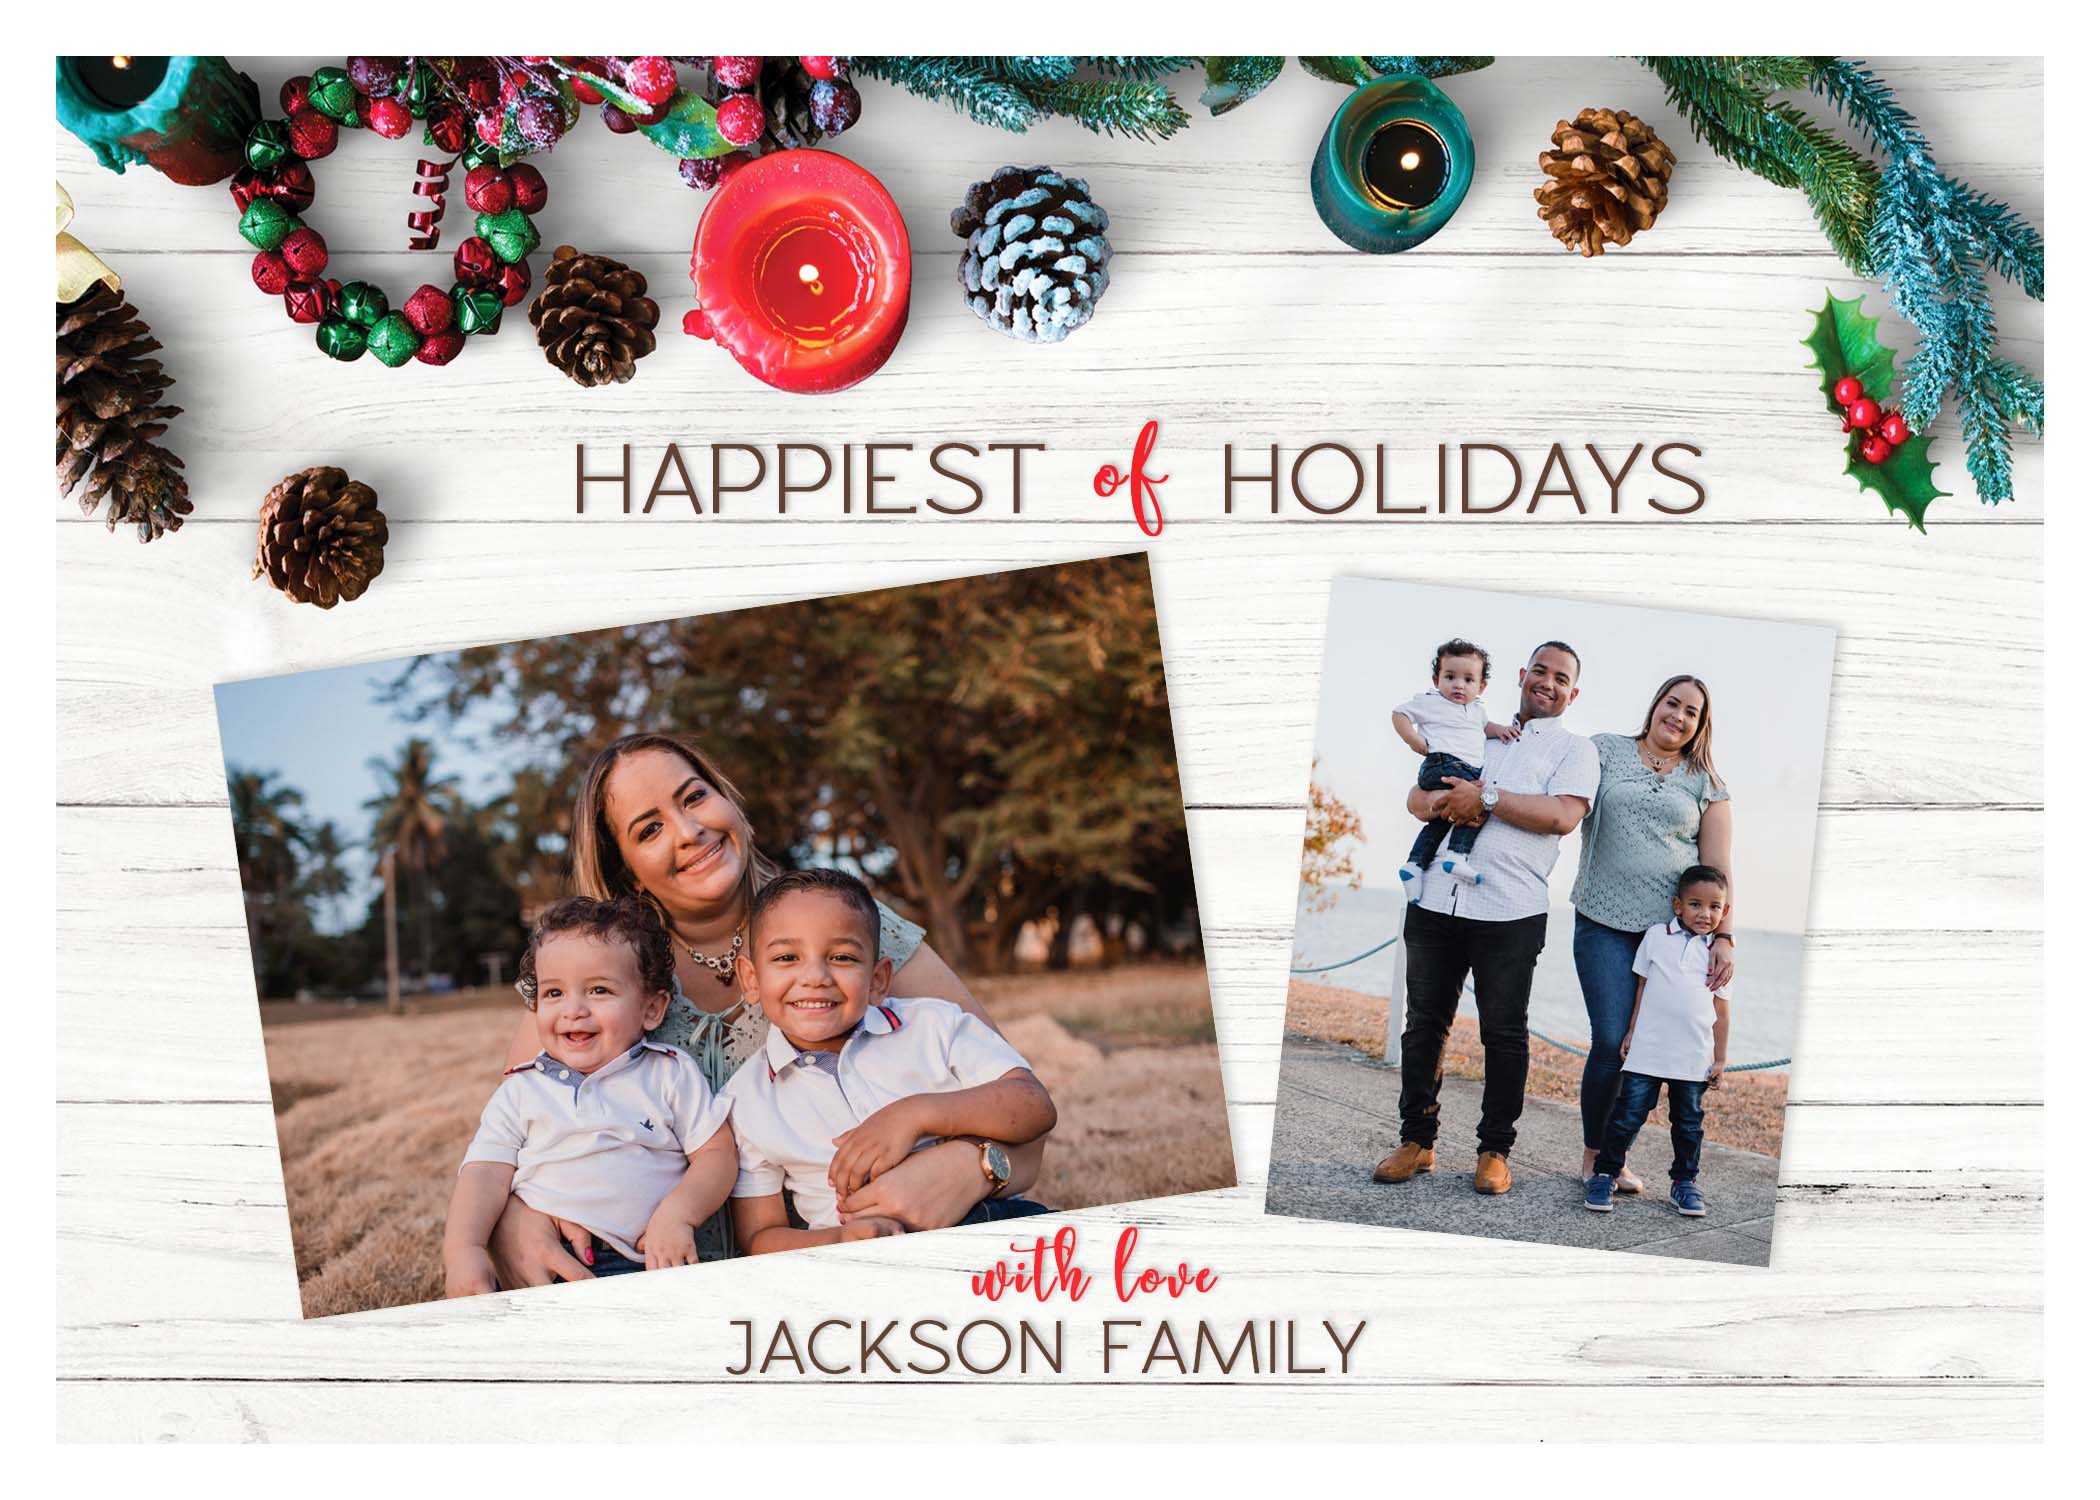 Holiday Greeting Card 1 | Dioskouri Designs With Free Christmas Card Templates For Photographers